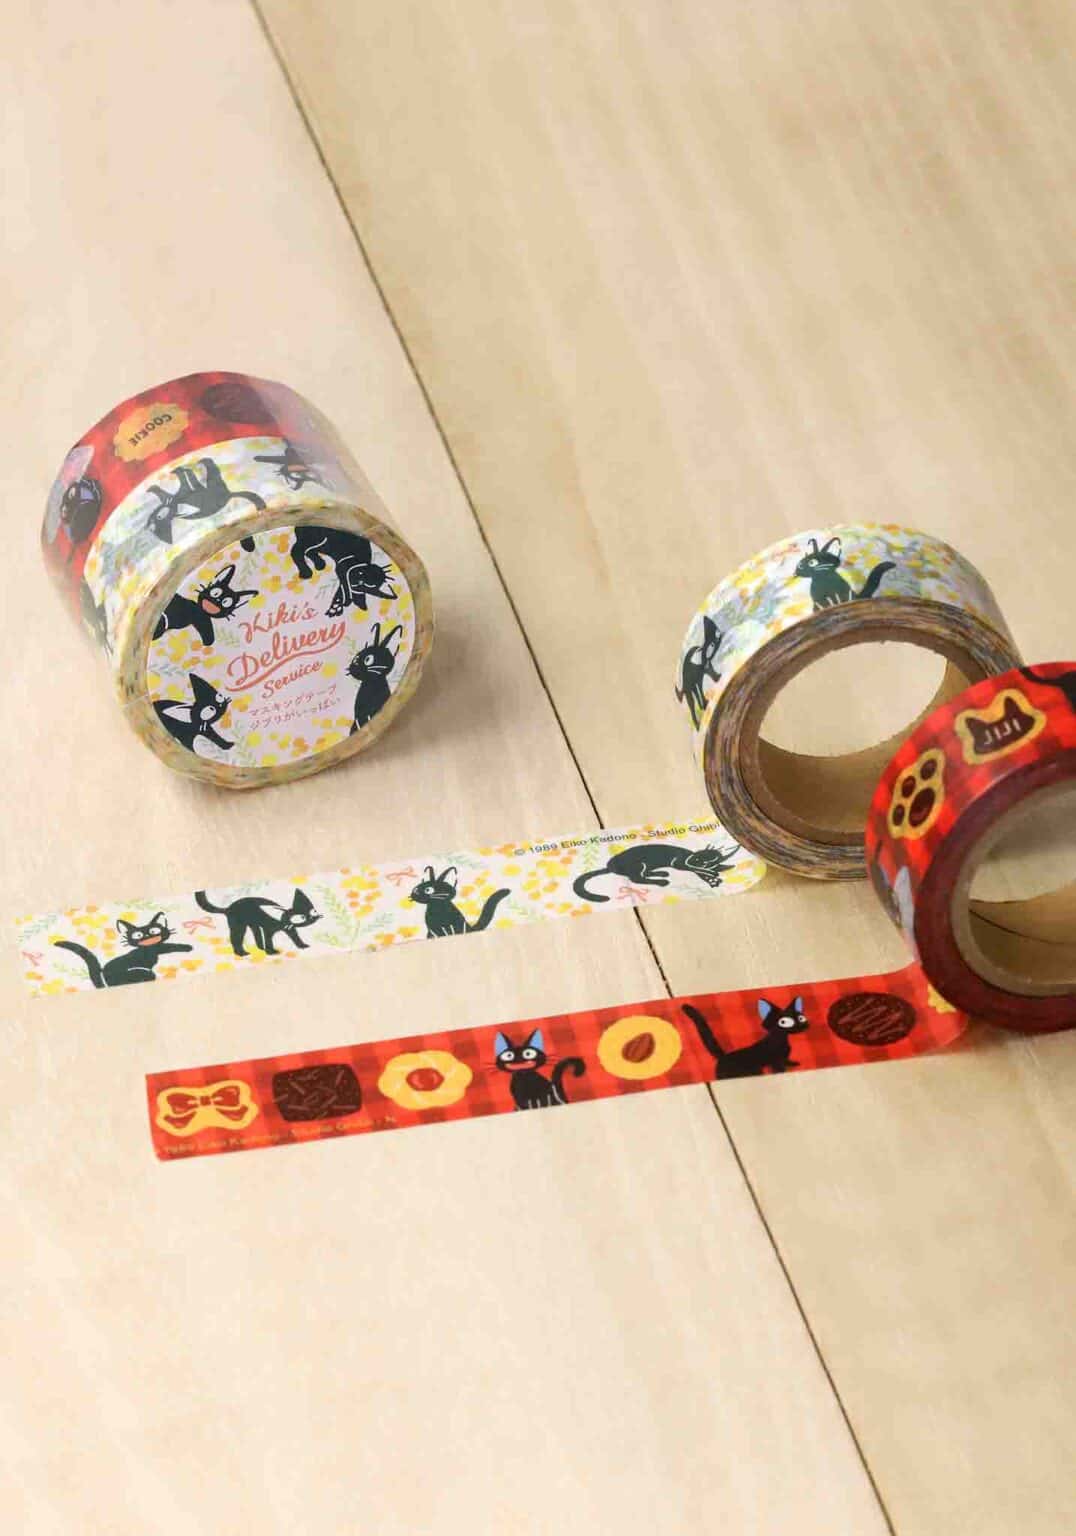 Clever Idiots Kiki’s Delivery Service Washi Masking Tapes 2-Piece Set Kawaii Gifts 4549743384863